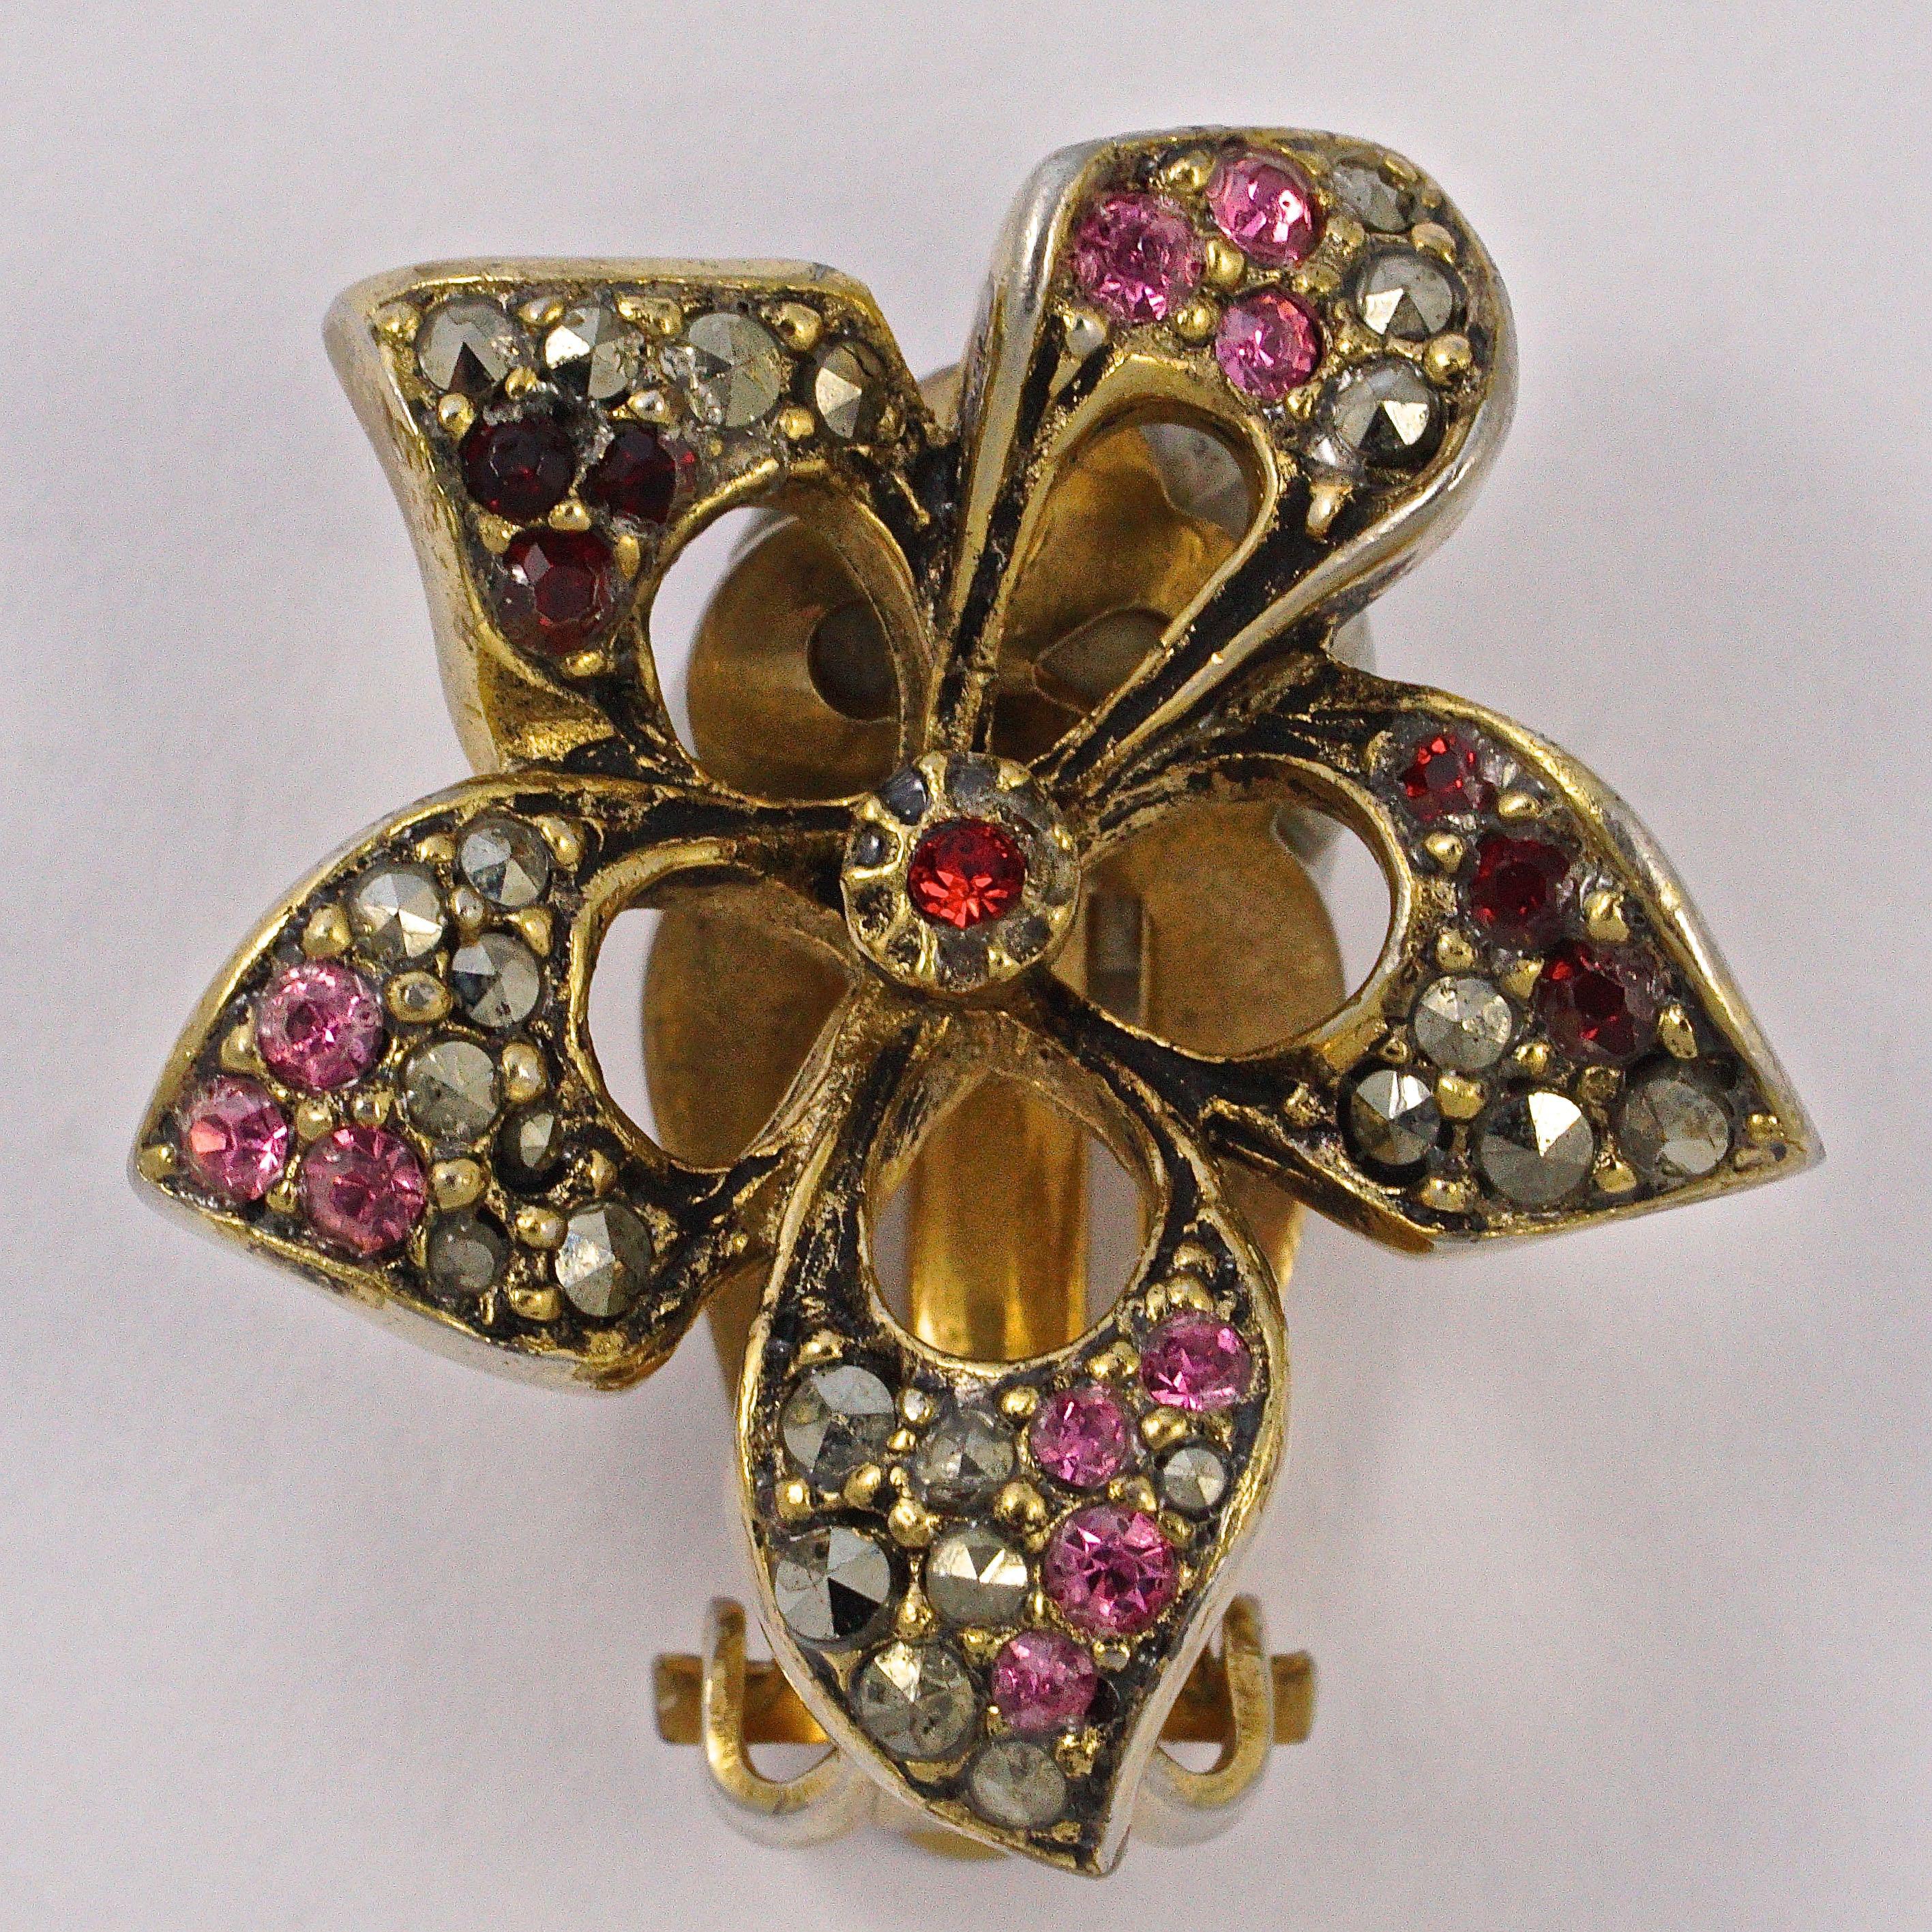 Exquisite Les Bernard gold plated clip on flower earrings, set with marcasites and red and pink rhinestones. Measuring 2.35cm / .92 inches by width 2.35cm / .92 inches.  

This is a beautiful pair of stylish vintage earrings by Les Bernard, circa